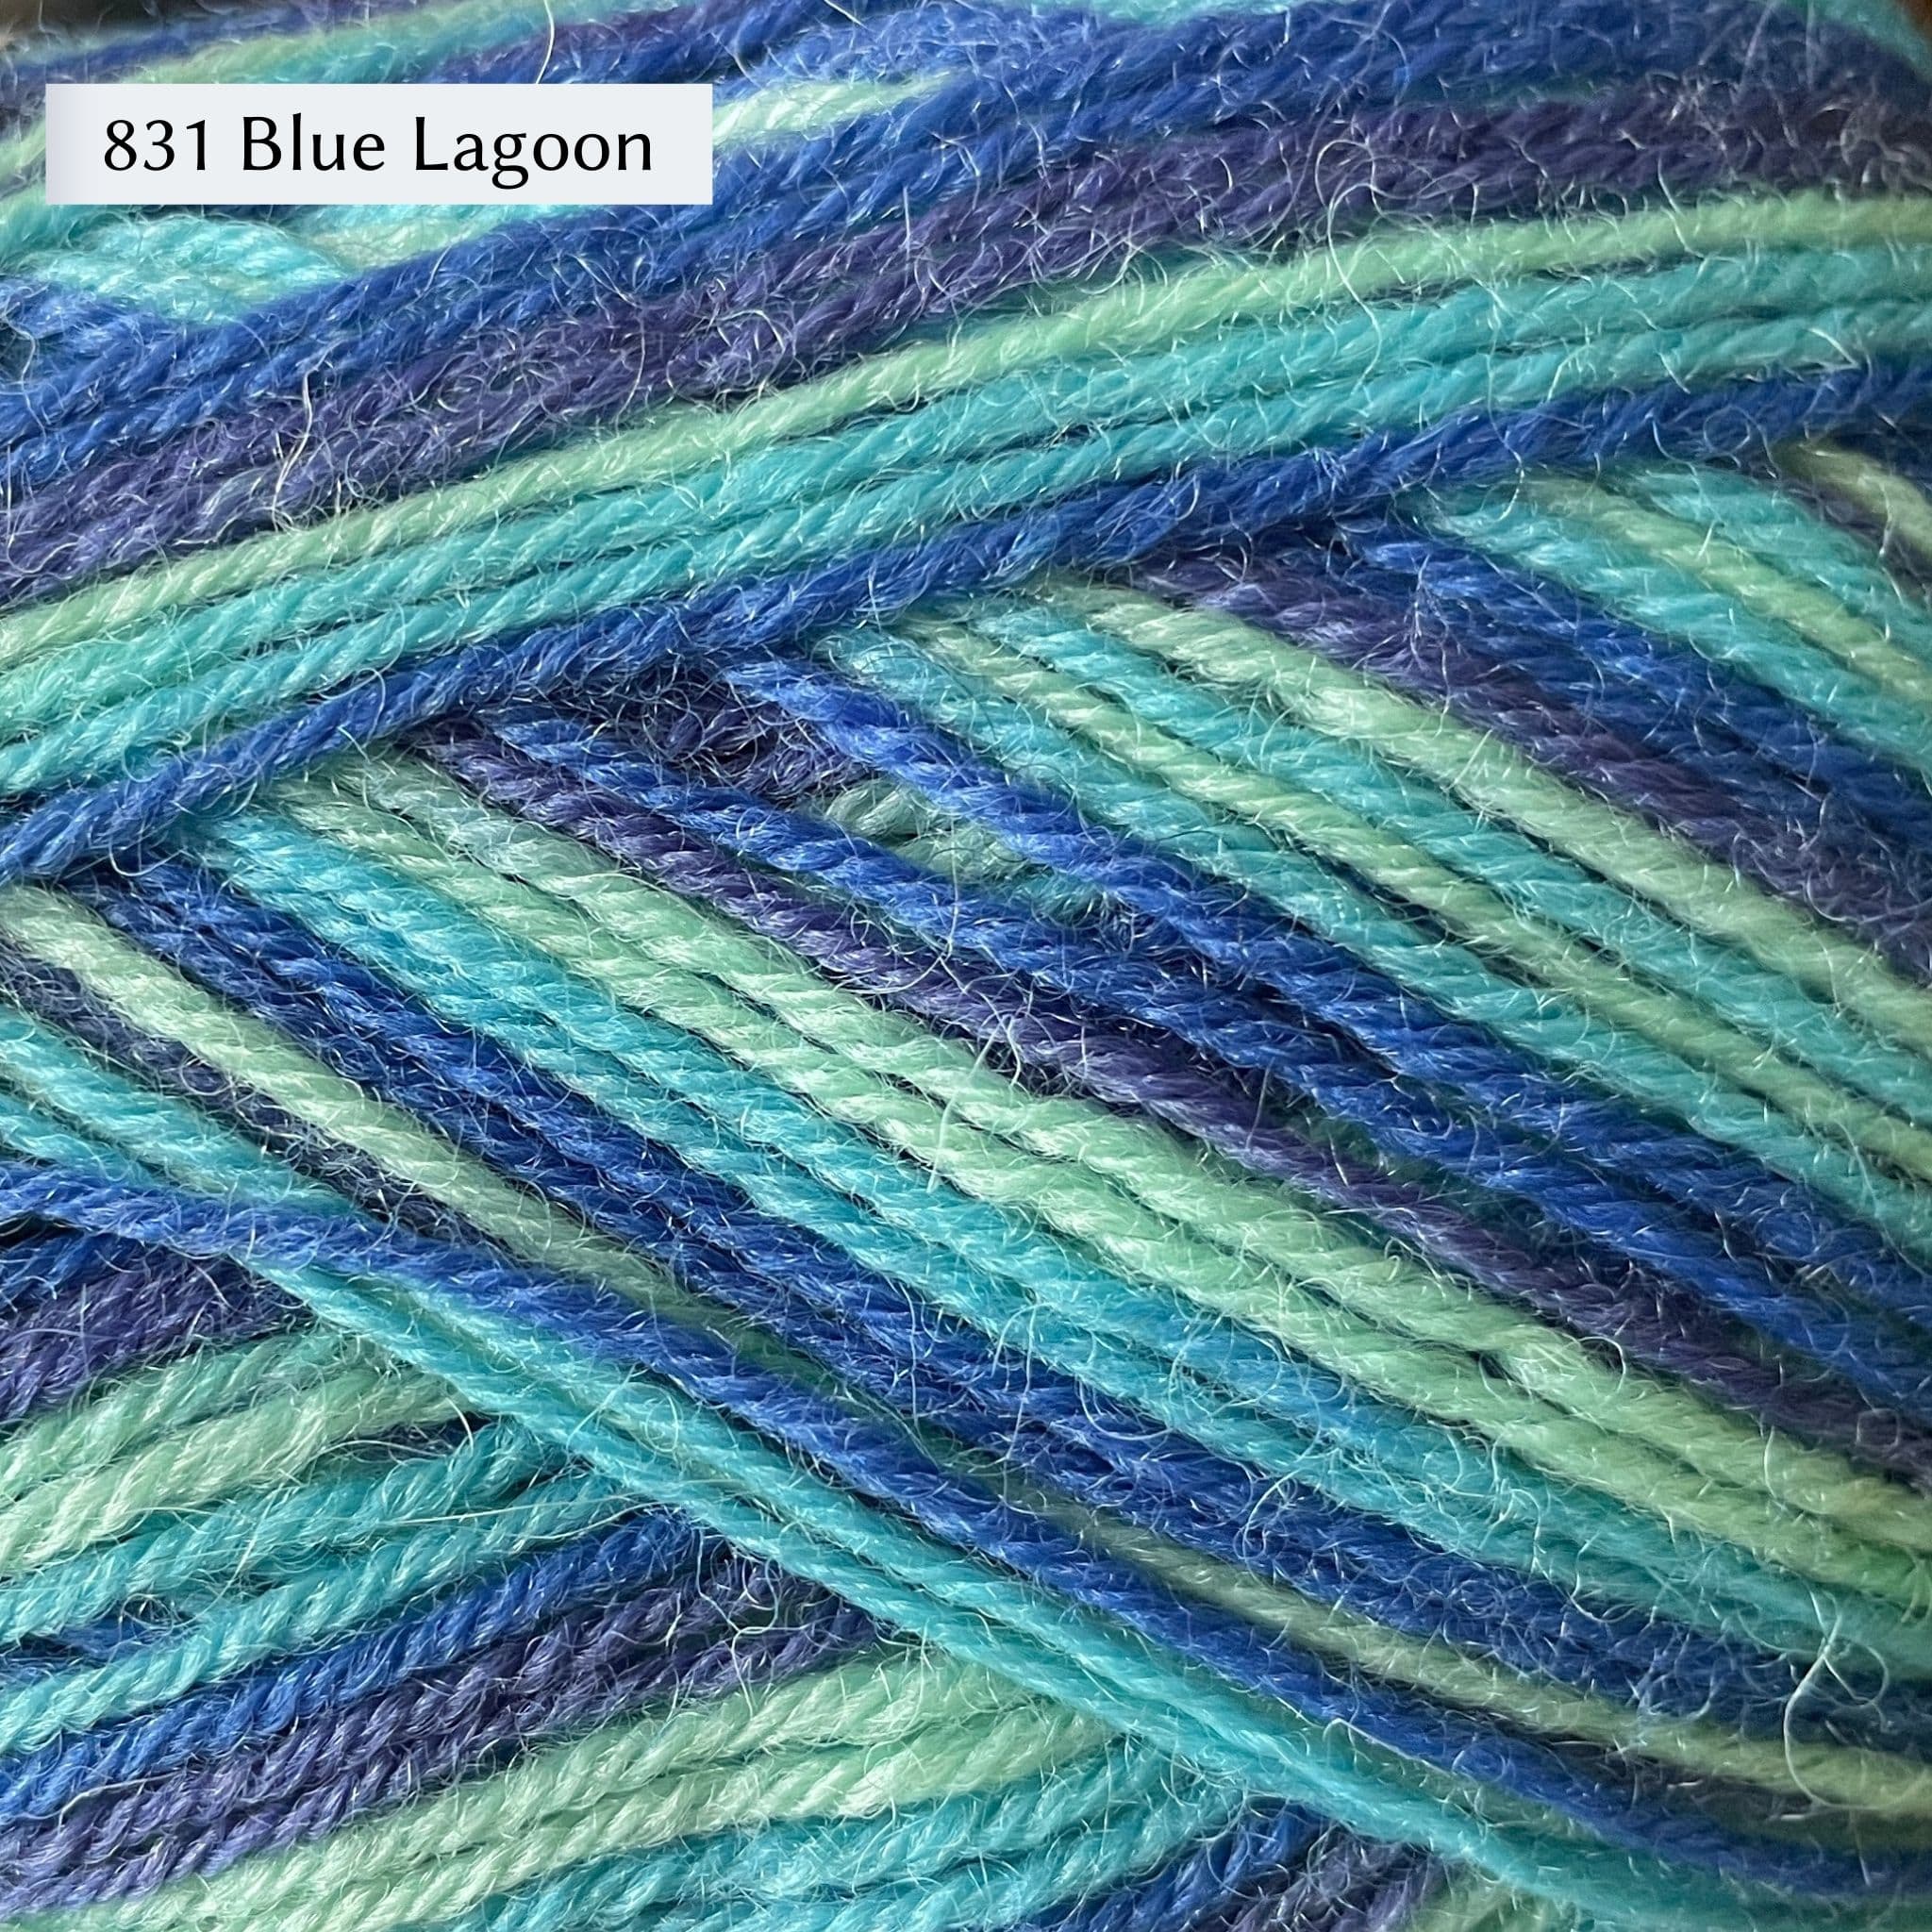 West Yorkshire Spinners Signature 4ply yarn, fingering weight, in color 831 Blue Lagoon, a striping yarn in shades of blue from dark blue to turquoise and aqua